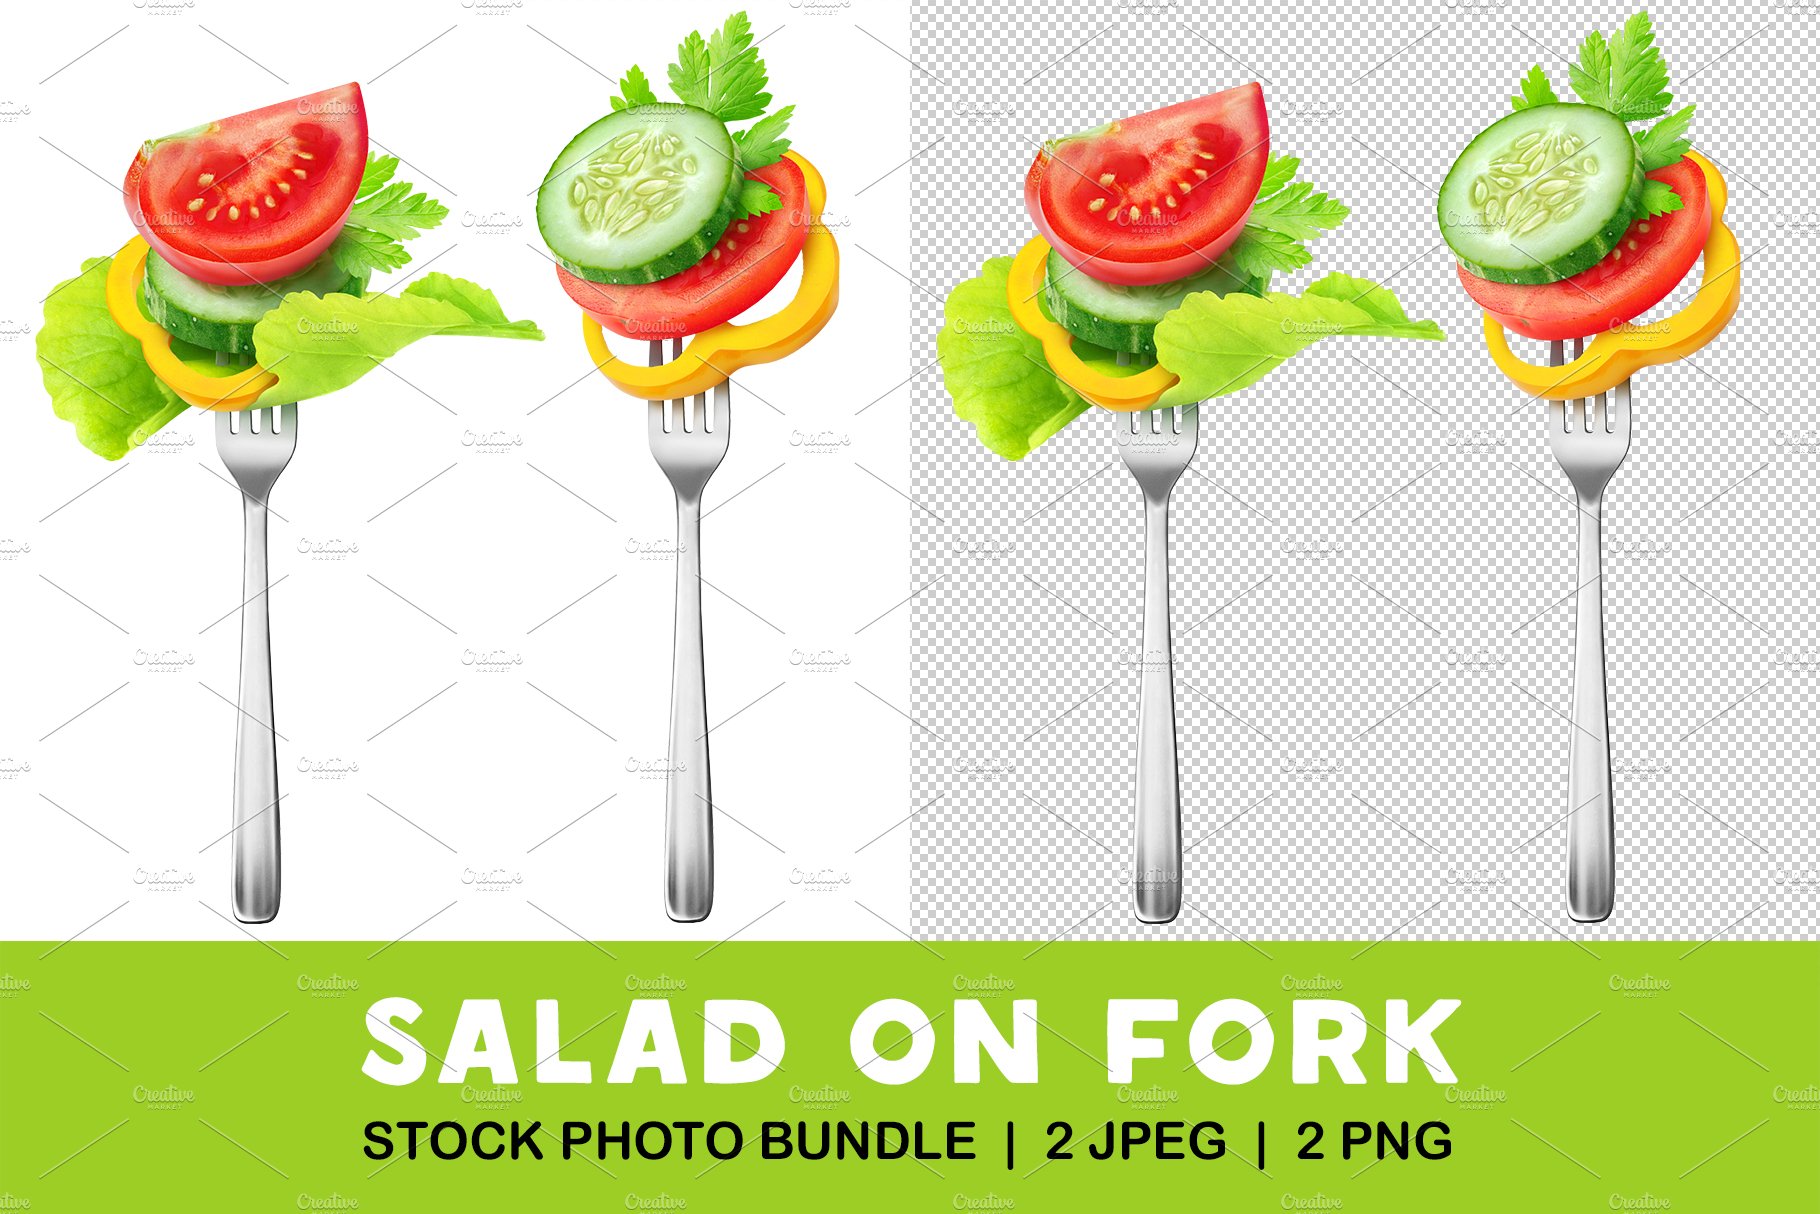 Pieces of vegetables on a fork cover image.